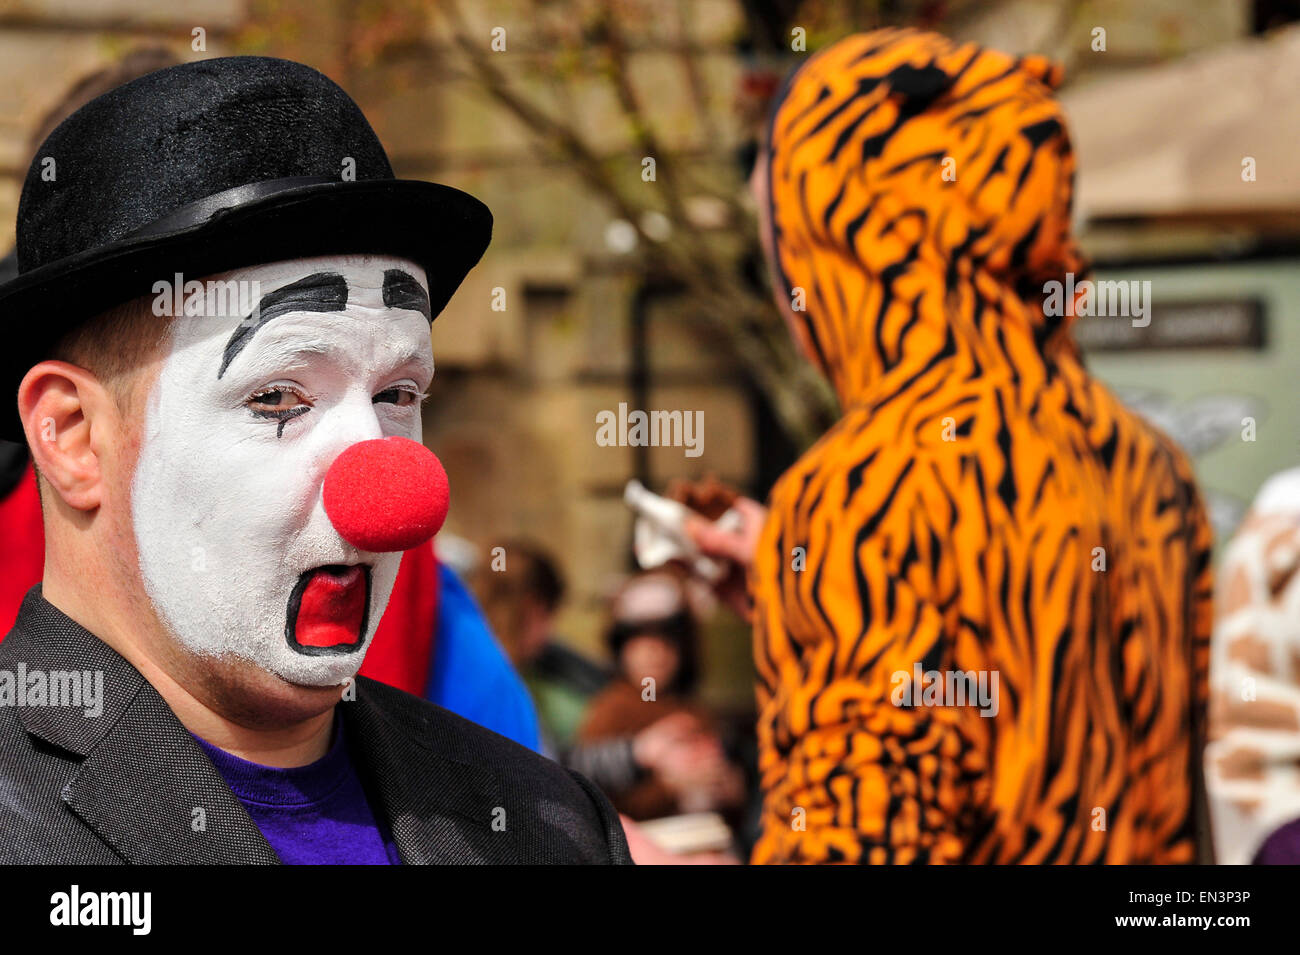 Clown with white painted face and red nose wearing a hat in the Guildhall Square, Derry, Londonderry, Northern Ireland. Stock Photo